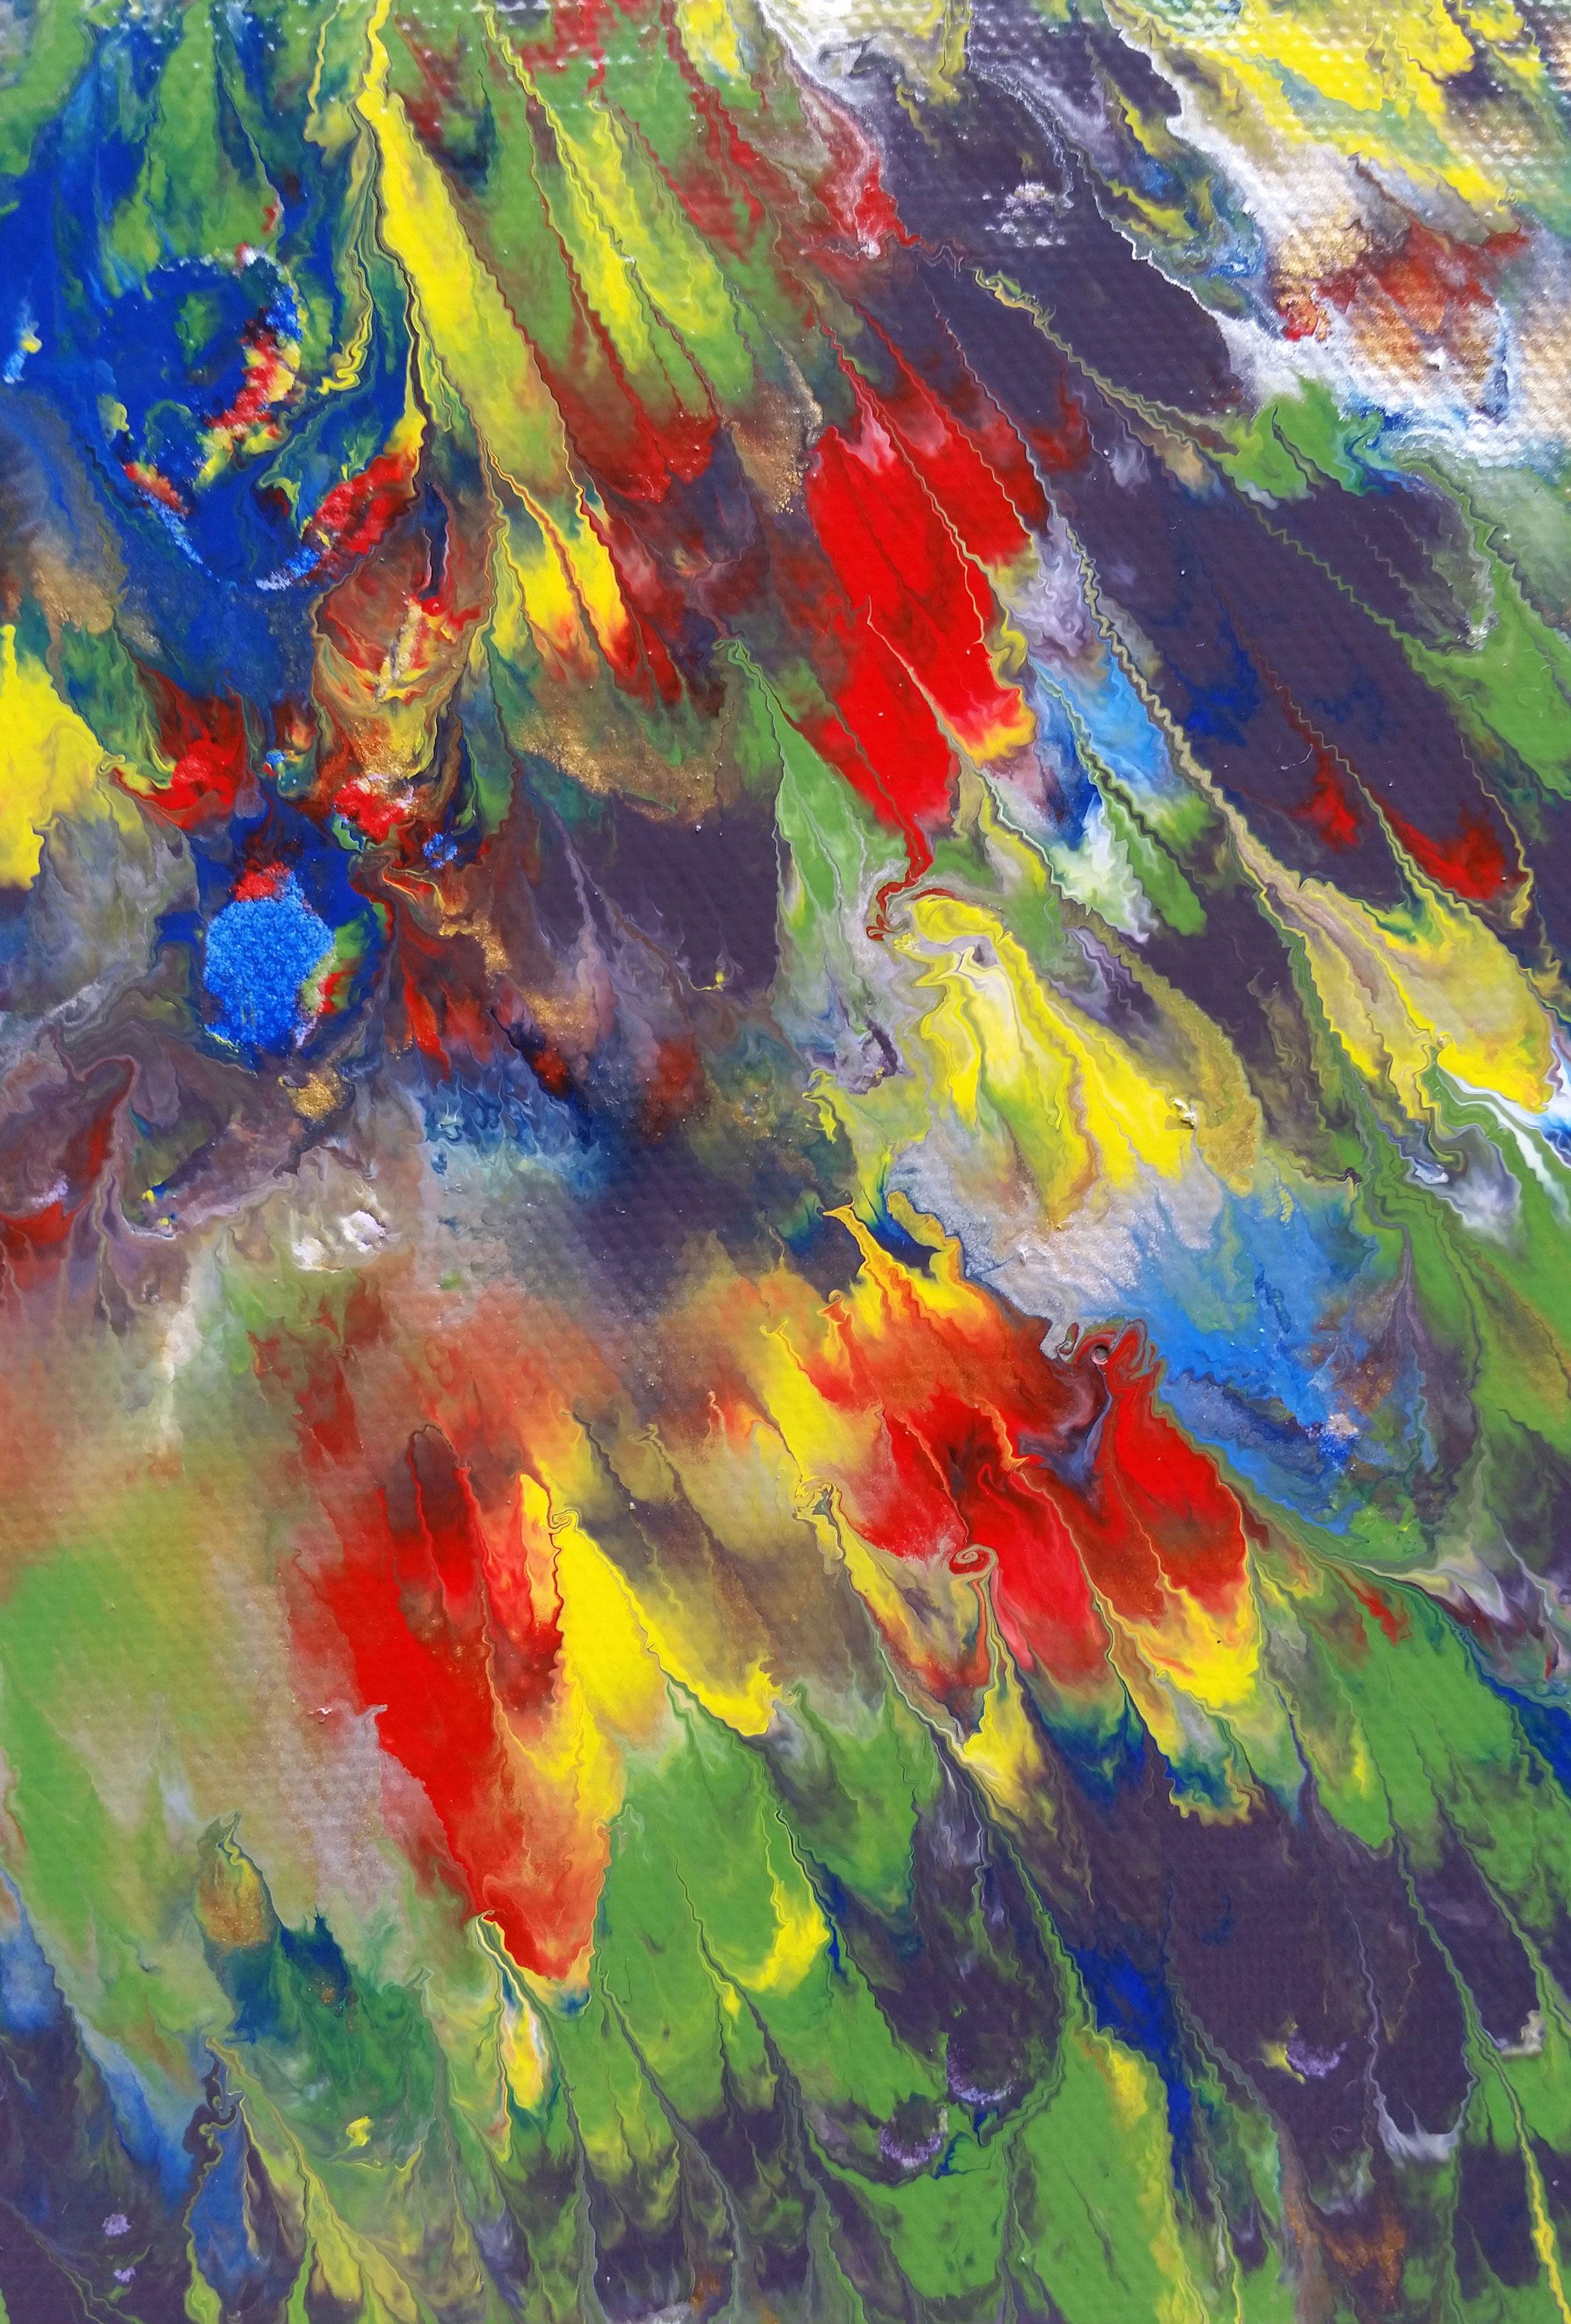 With vibrant colors over a light lavender purple background, this painting bursts with bold movement. Blue and white blends adorn the top of the piece to resemble billowing clouds, while yellow and red shoot down the piece to imitate volcanic rocks;